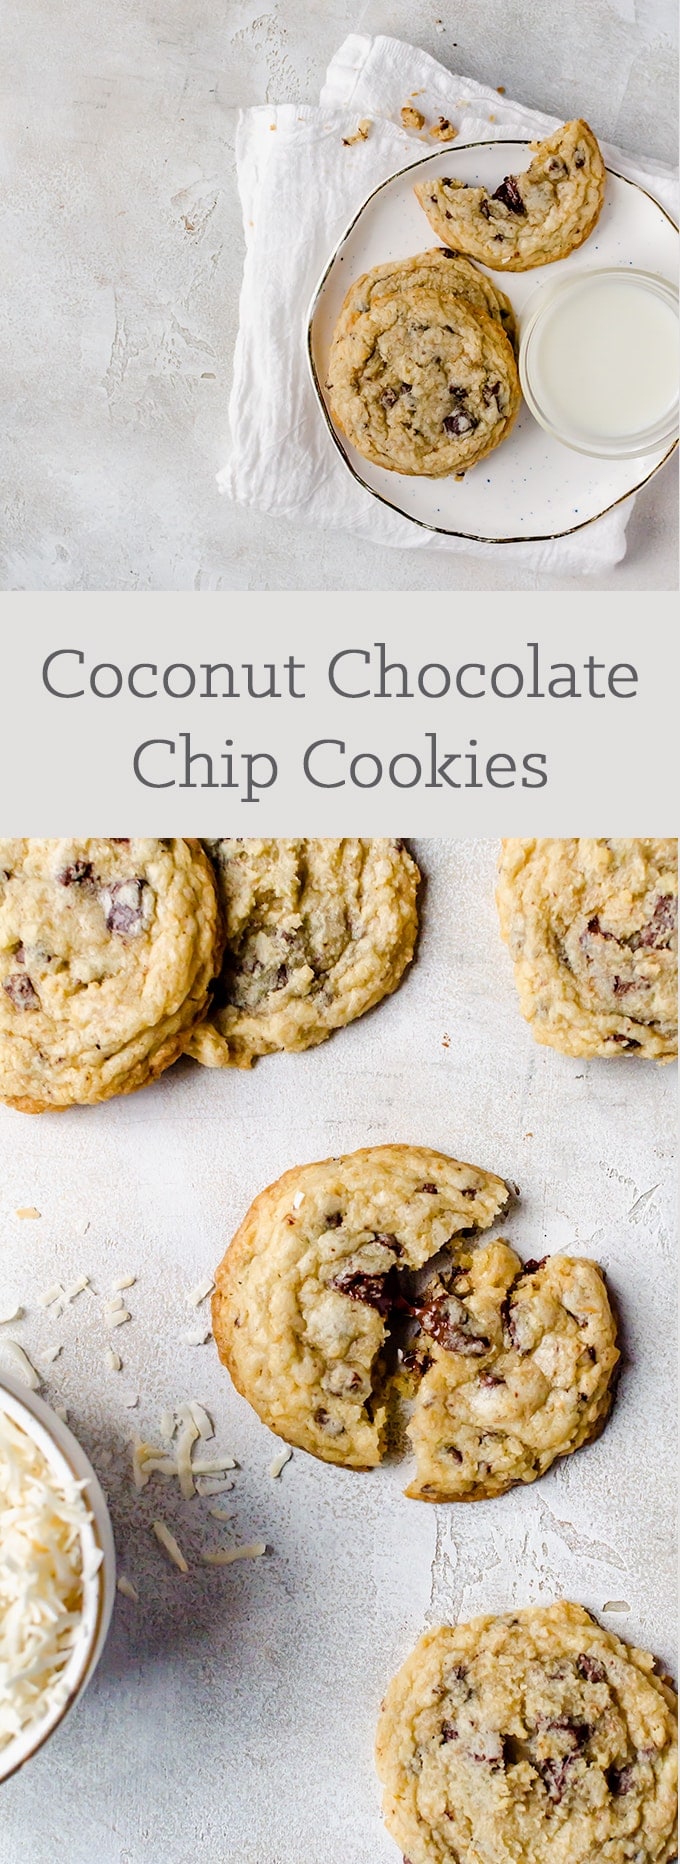 coconut-chocolate-chip-cookies